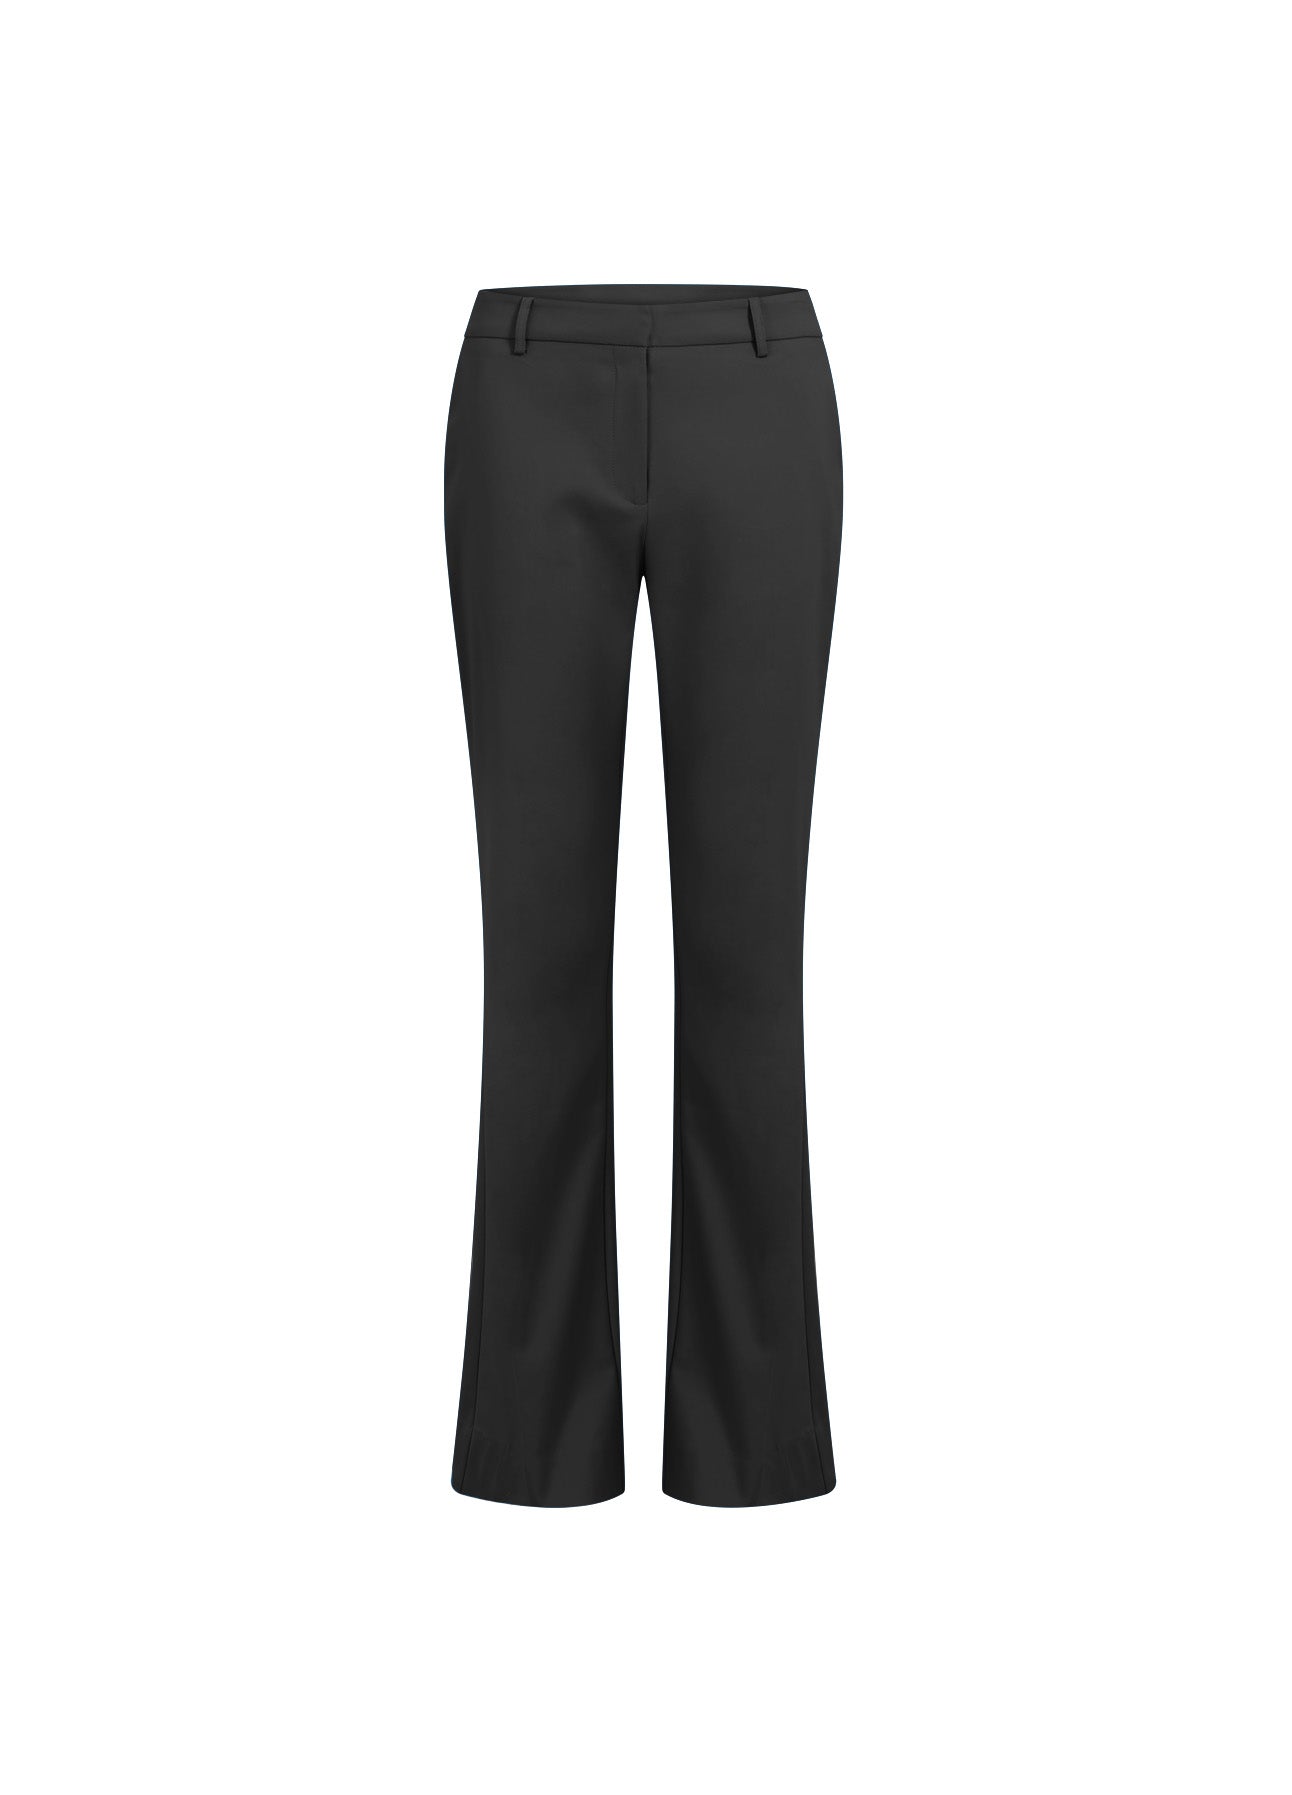 LADIES TROUSERS QUALITY BLACK FITTED BOOT CUT TROUSERS 6-14 & 3 LEG  LENGTHS.